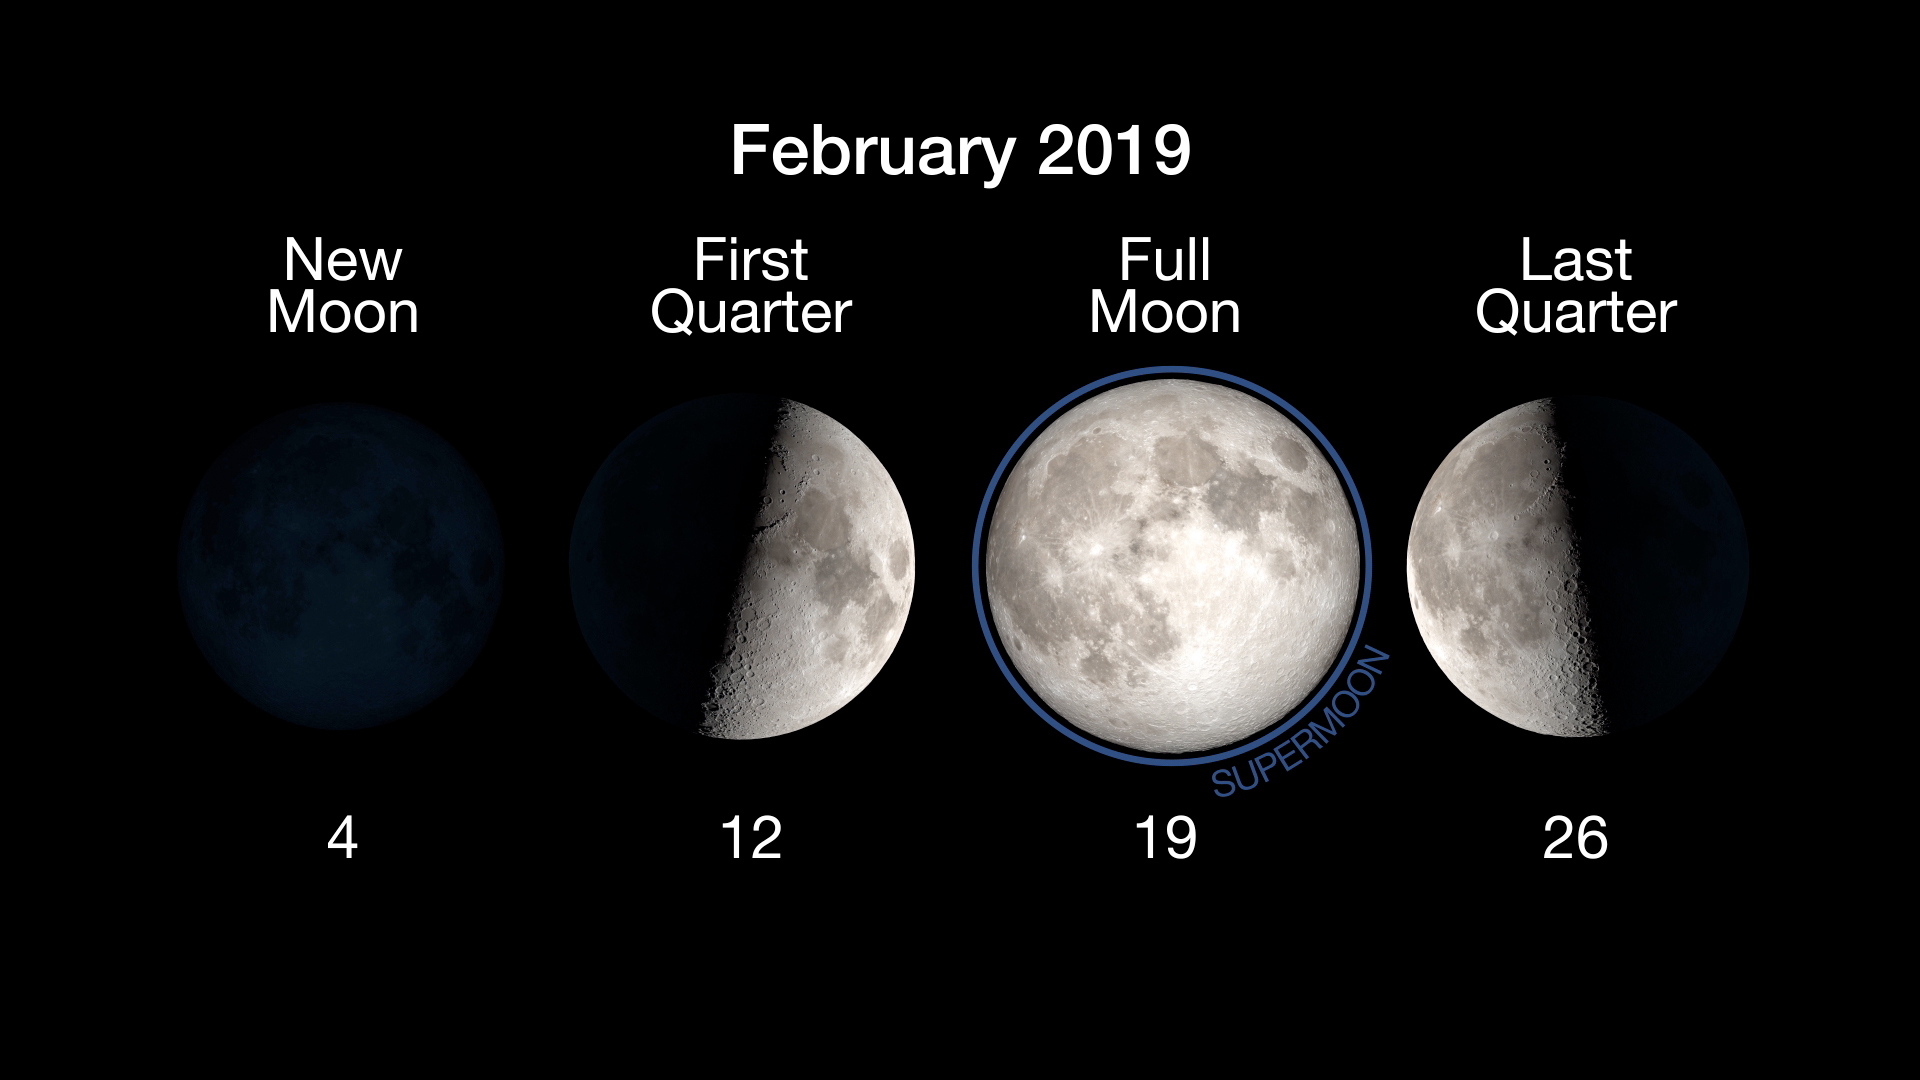 what-s-up-february-2019-skywatching-from-nasa-nasa-solar-system